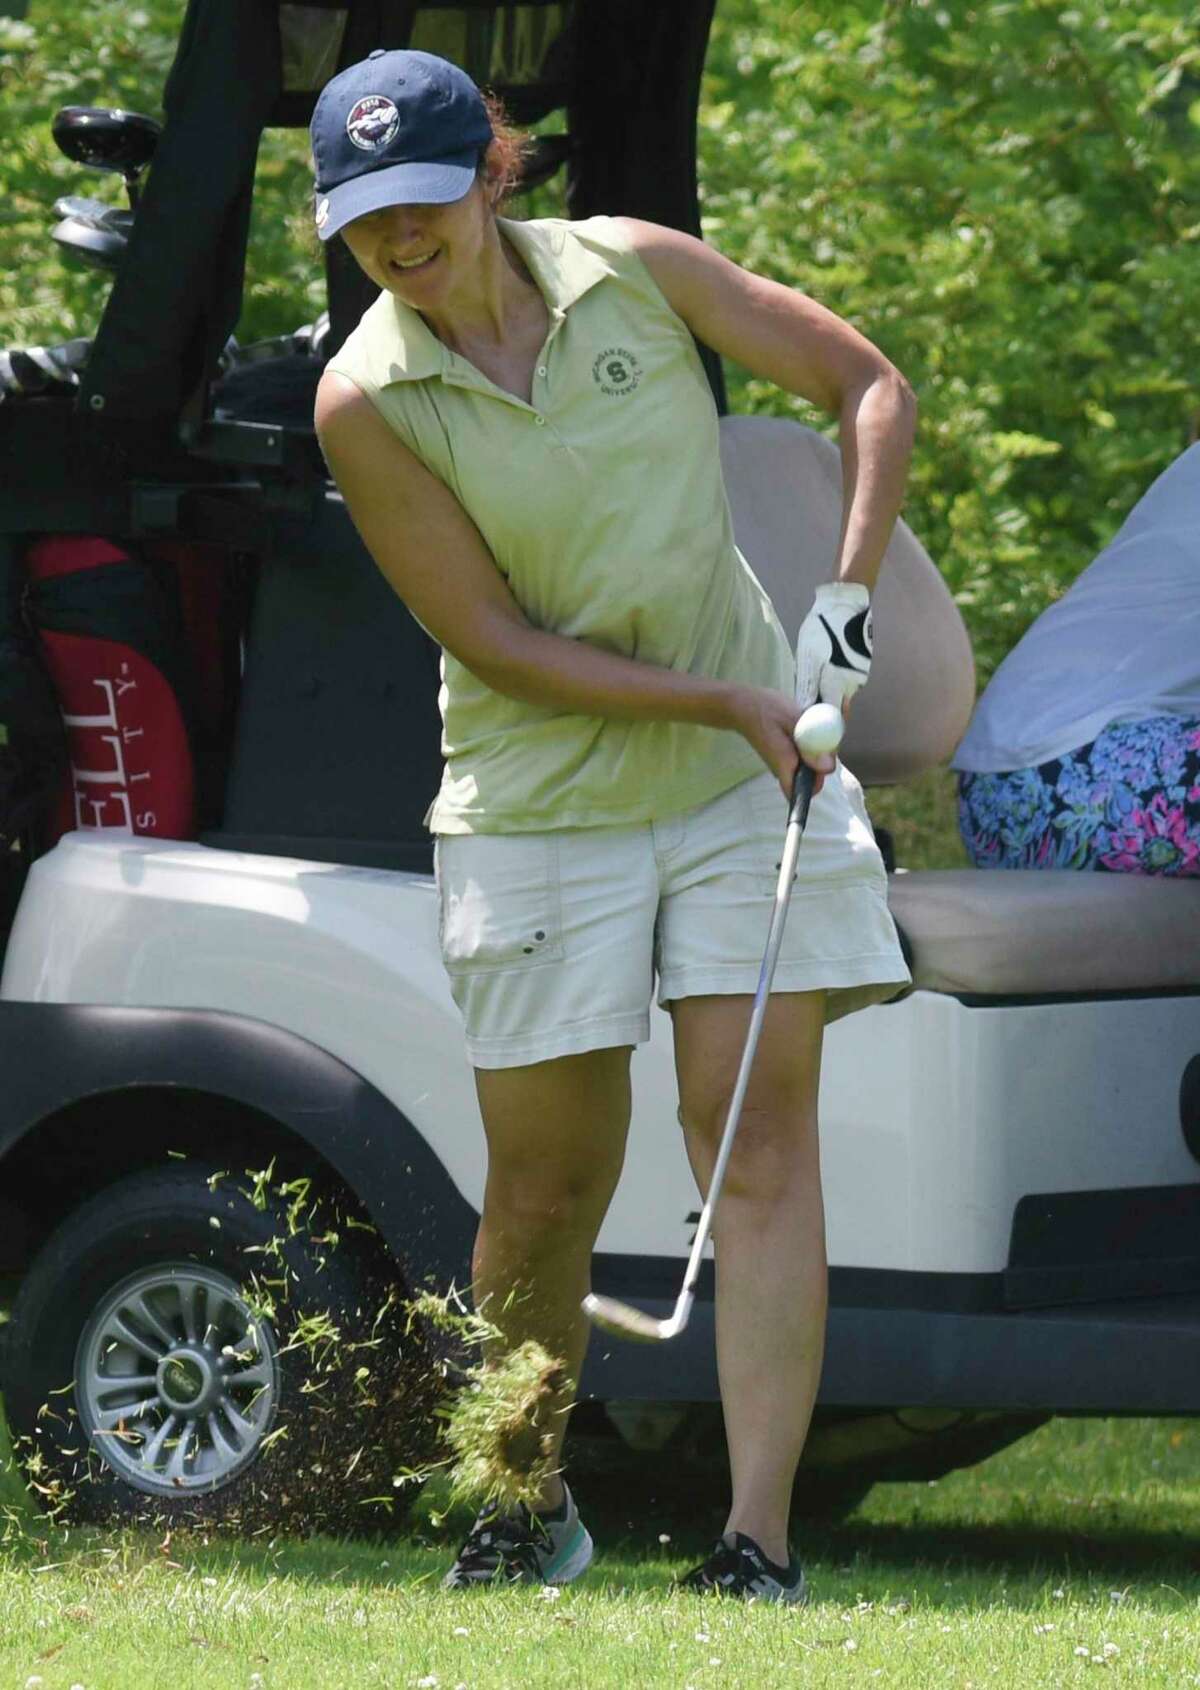 Olga Harvey hits an approach shot in the Town Wide Women's Golf Tournament at Griffith E. Harris Golf Course in Greenwich, Conn. Monday, June 28, 2021.